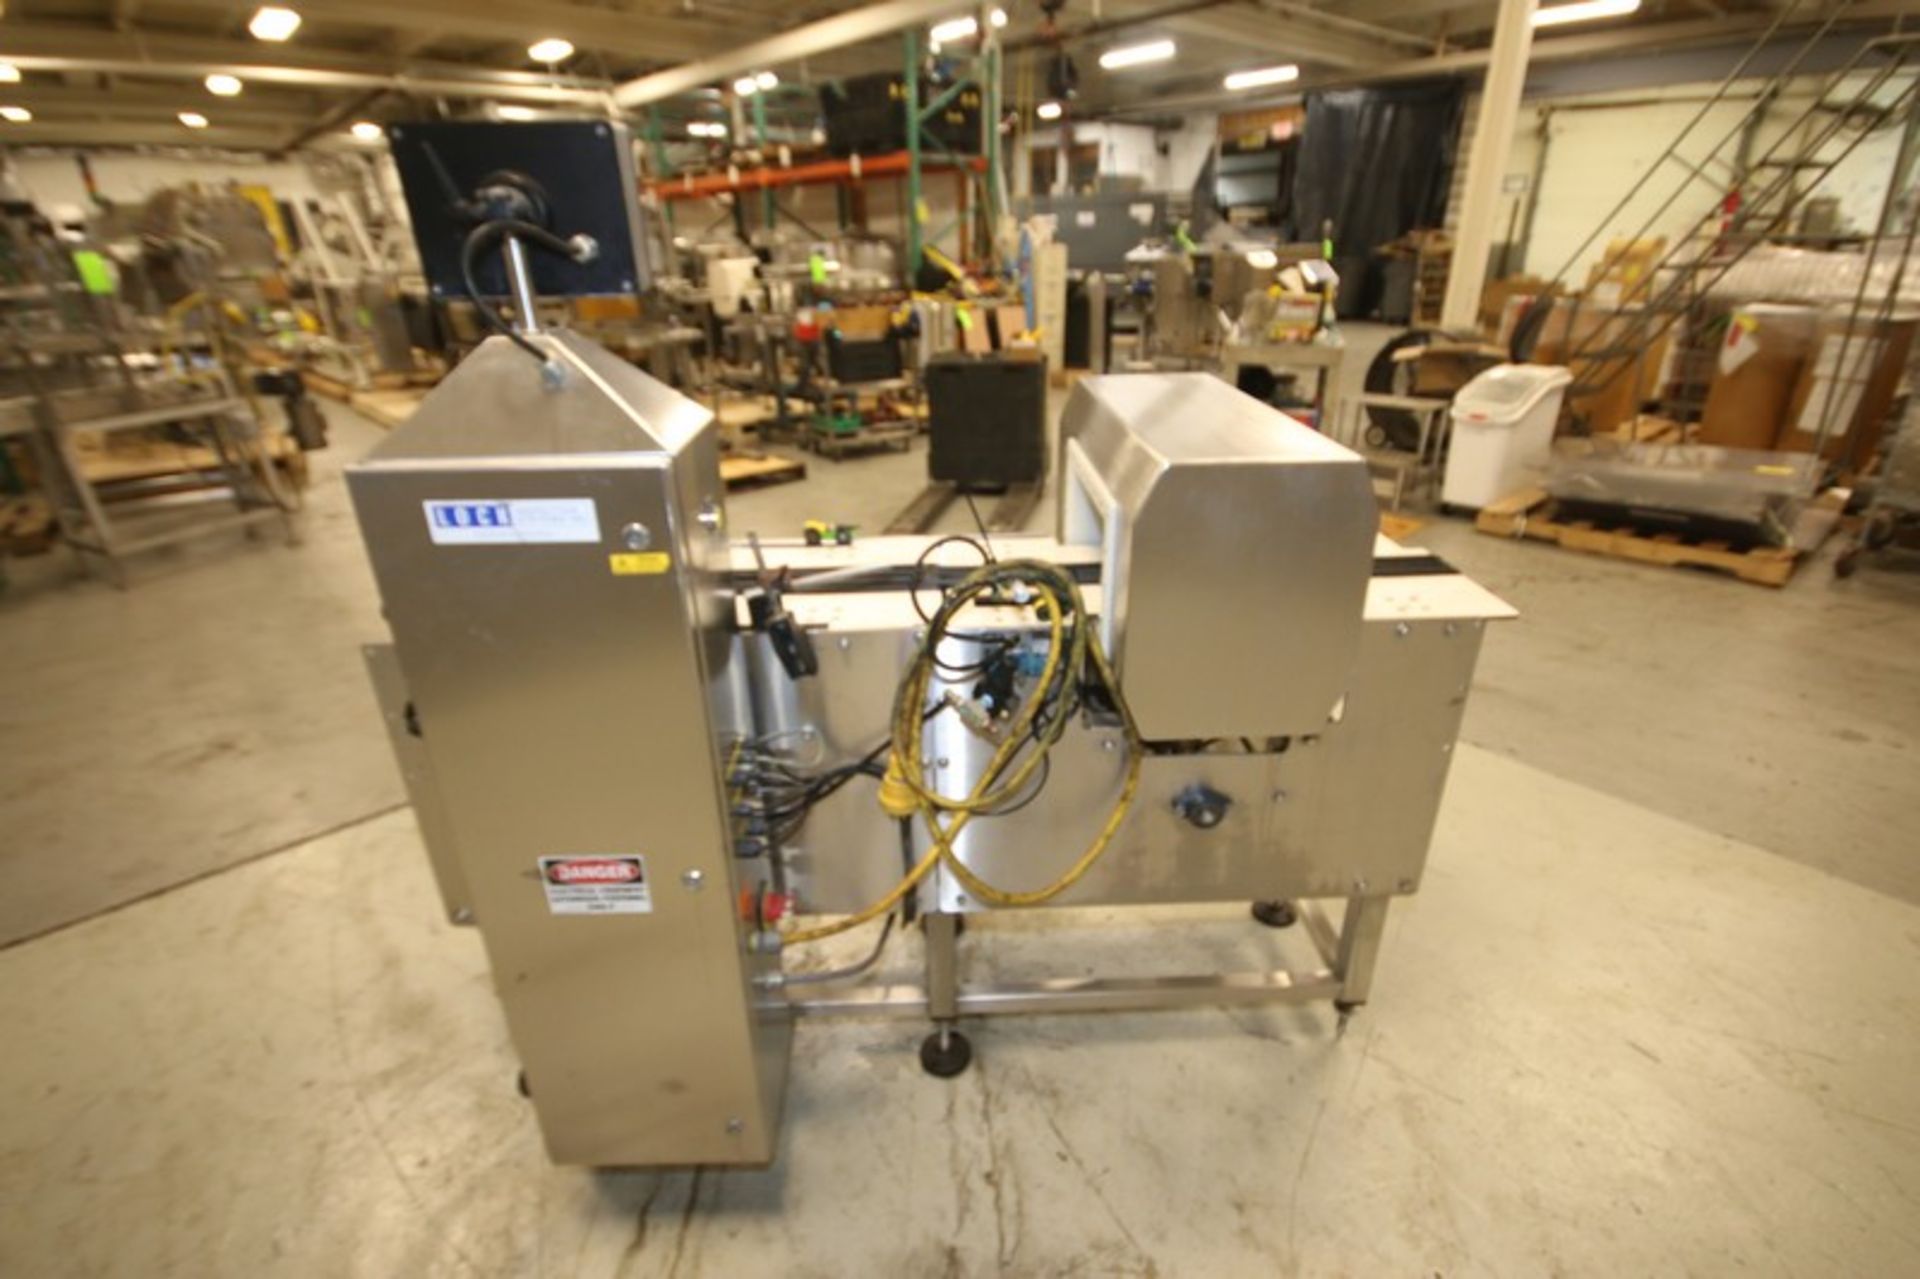 2010 Lock Weighchek S/S Metal Detector / Check-Weigher, Model CC2500 WEIGHCHECK-CHAIN, SN LIS1002- - Image 3 of 9